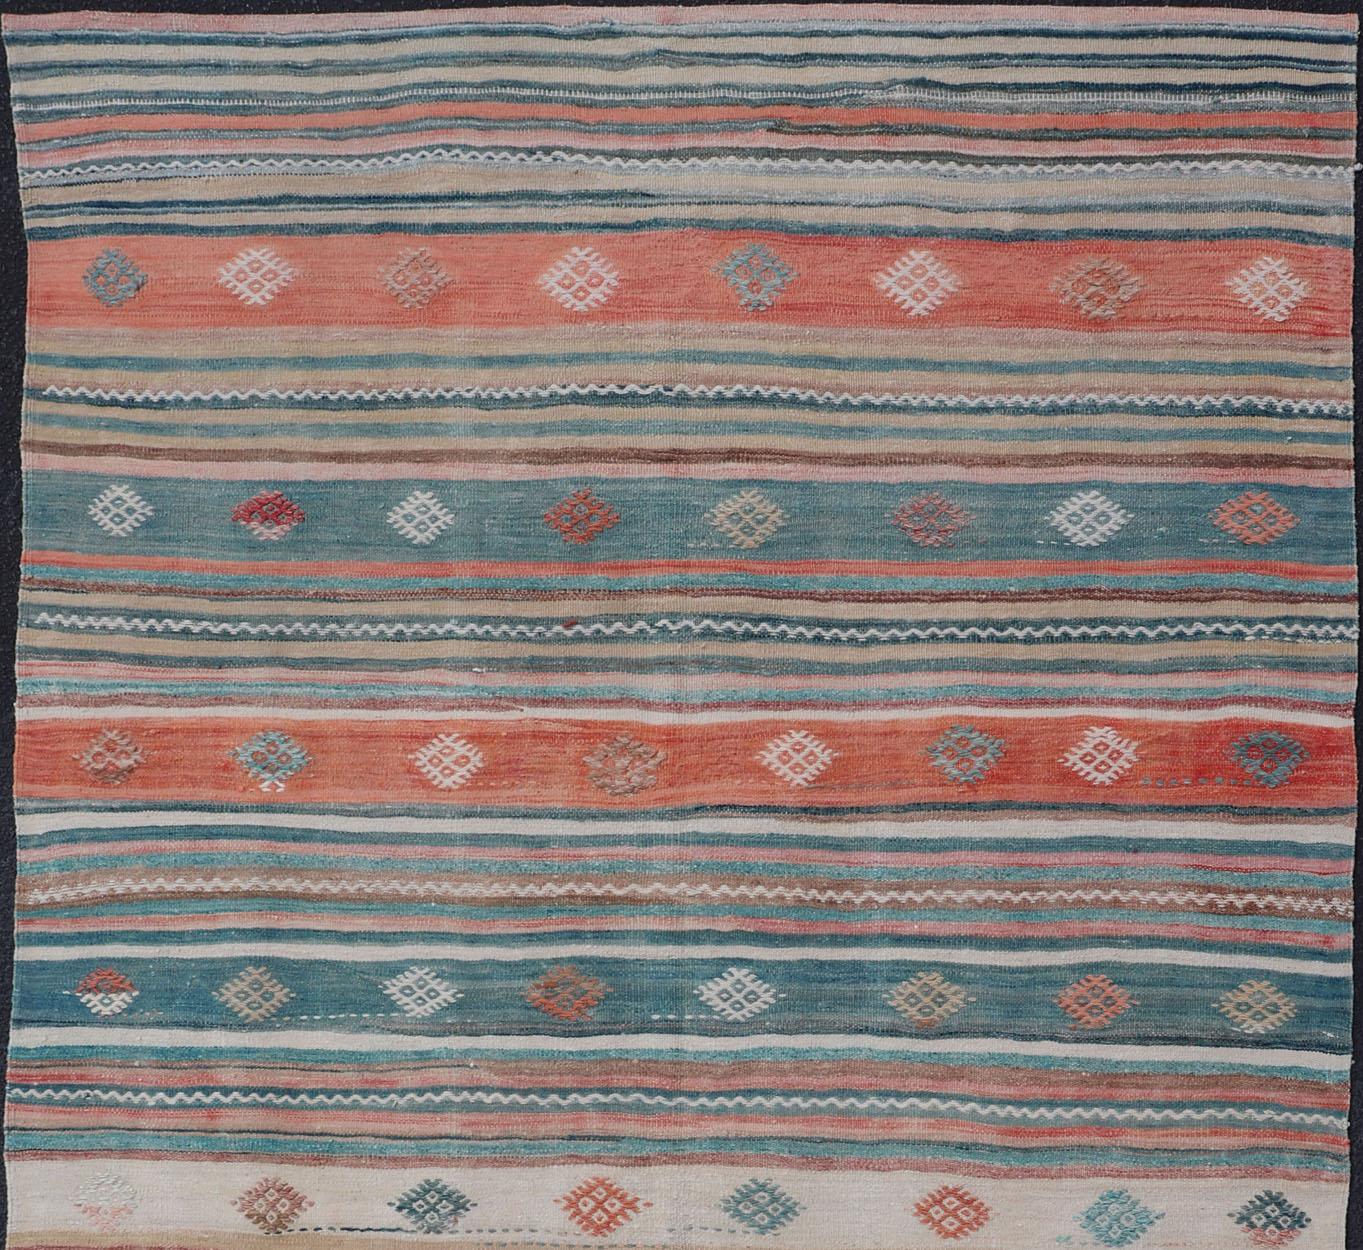 Colorful Vintage Turkish Embroidered Kilim with Stripes and Geometric Motifs For Sale 2